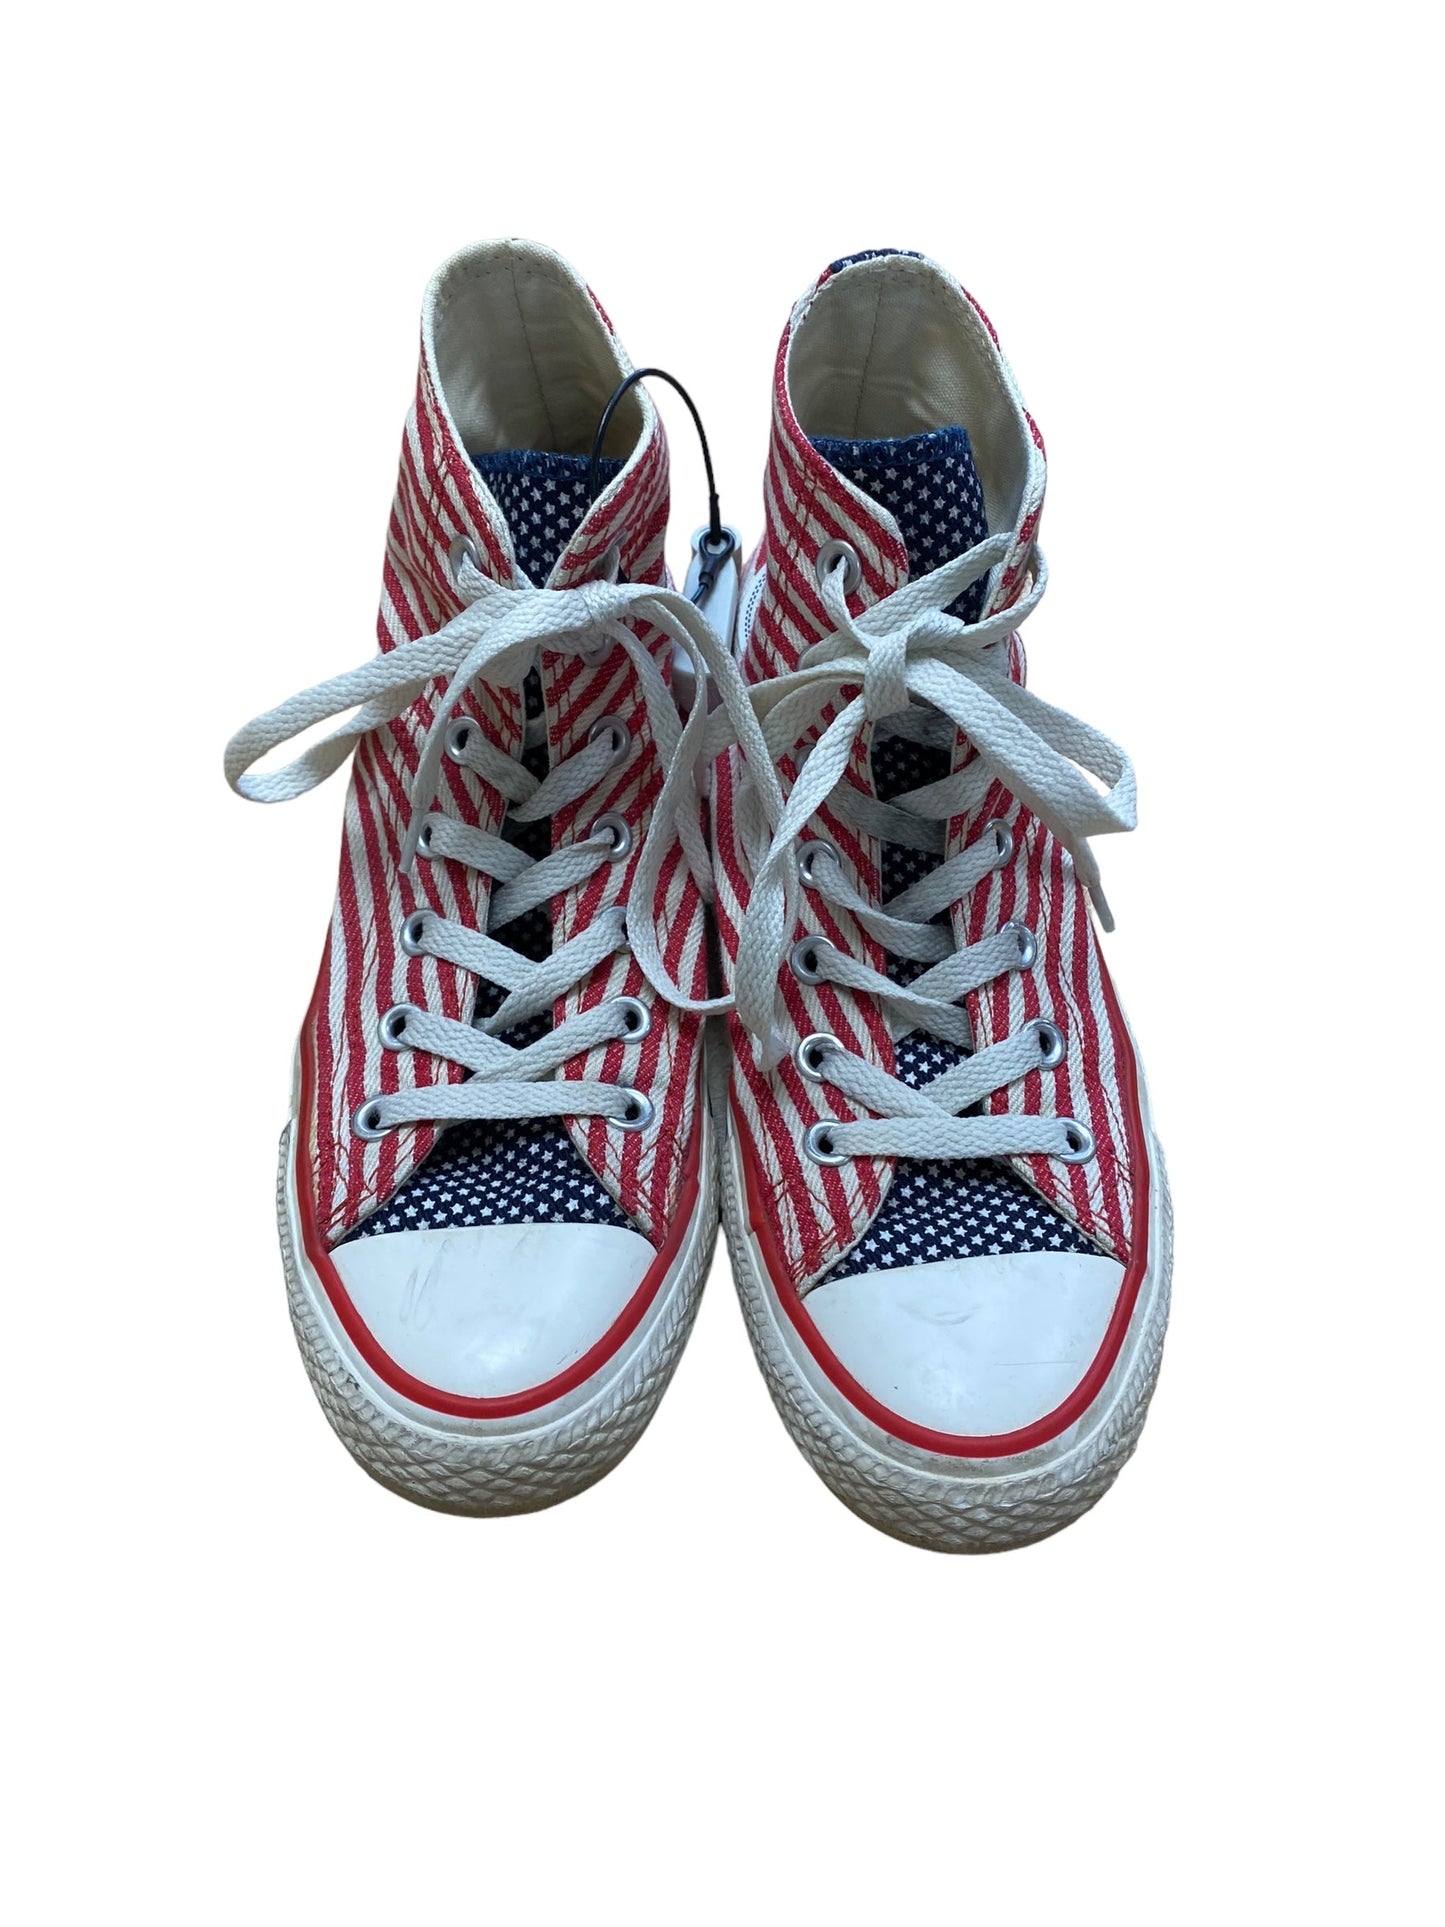 Blue & Red & White Shoes Sneakers Converse, Size 7